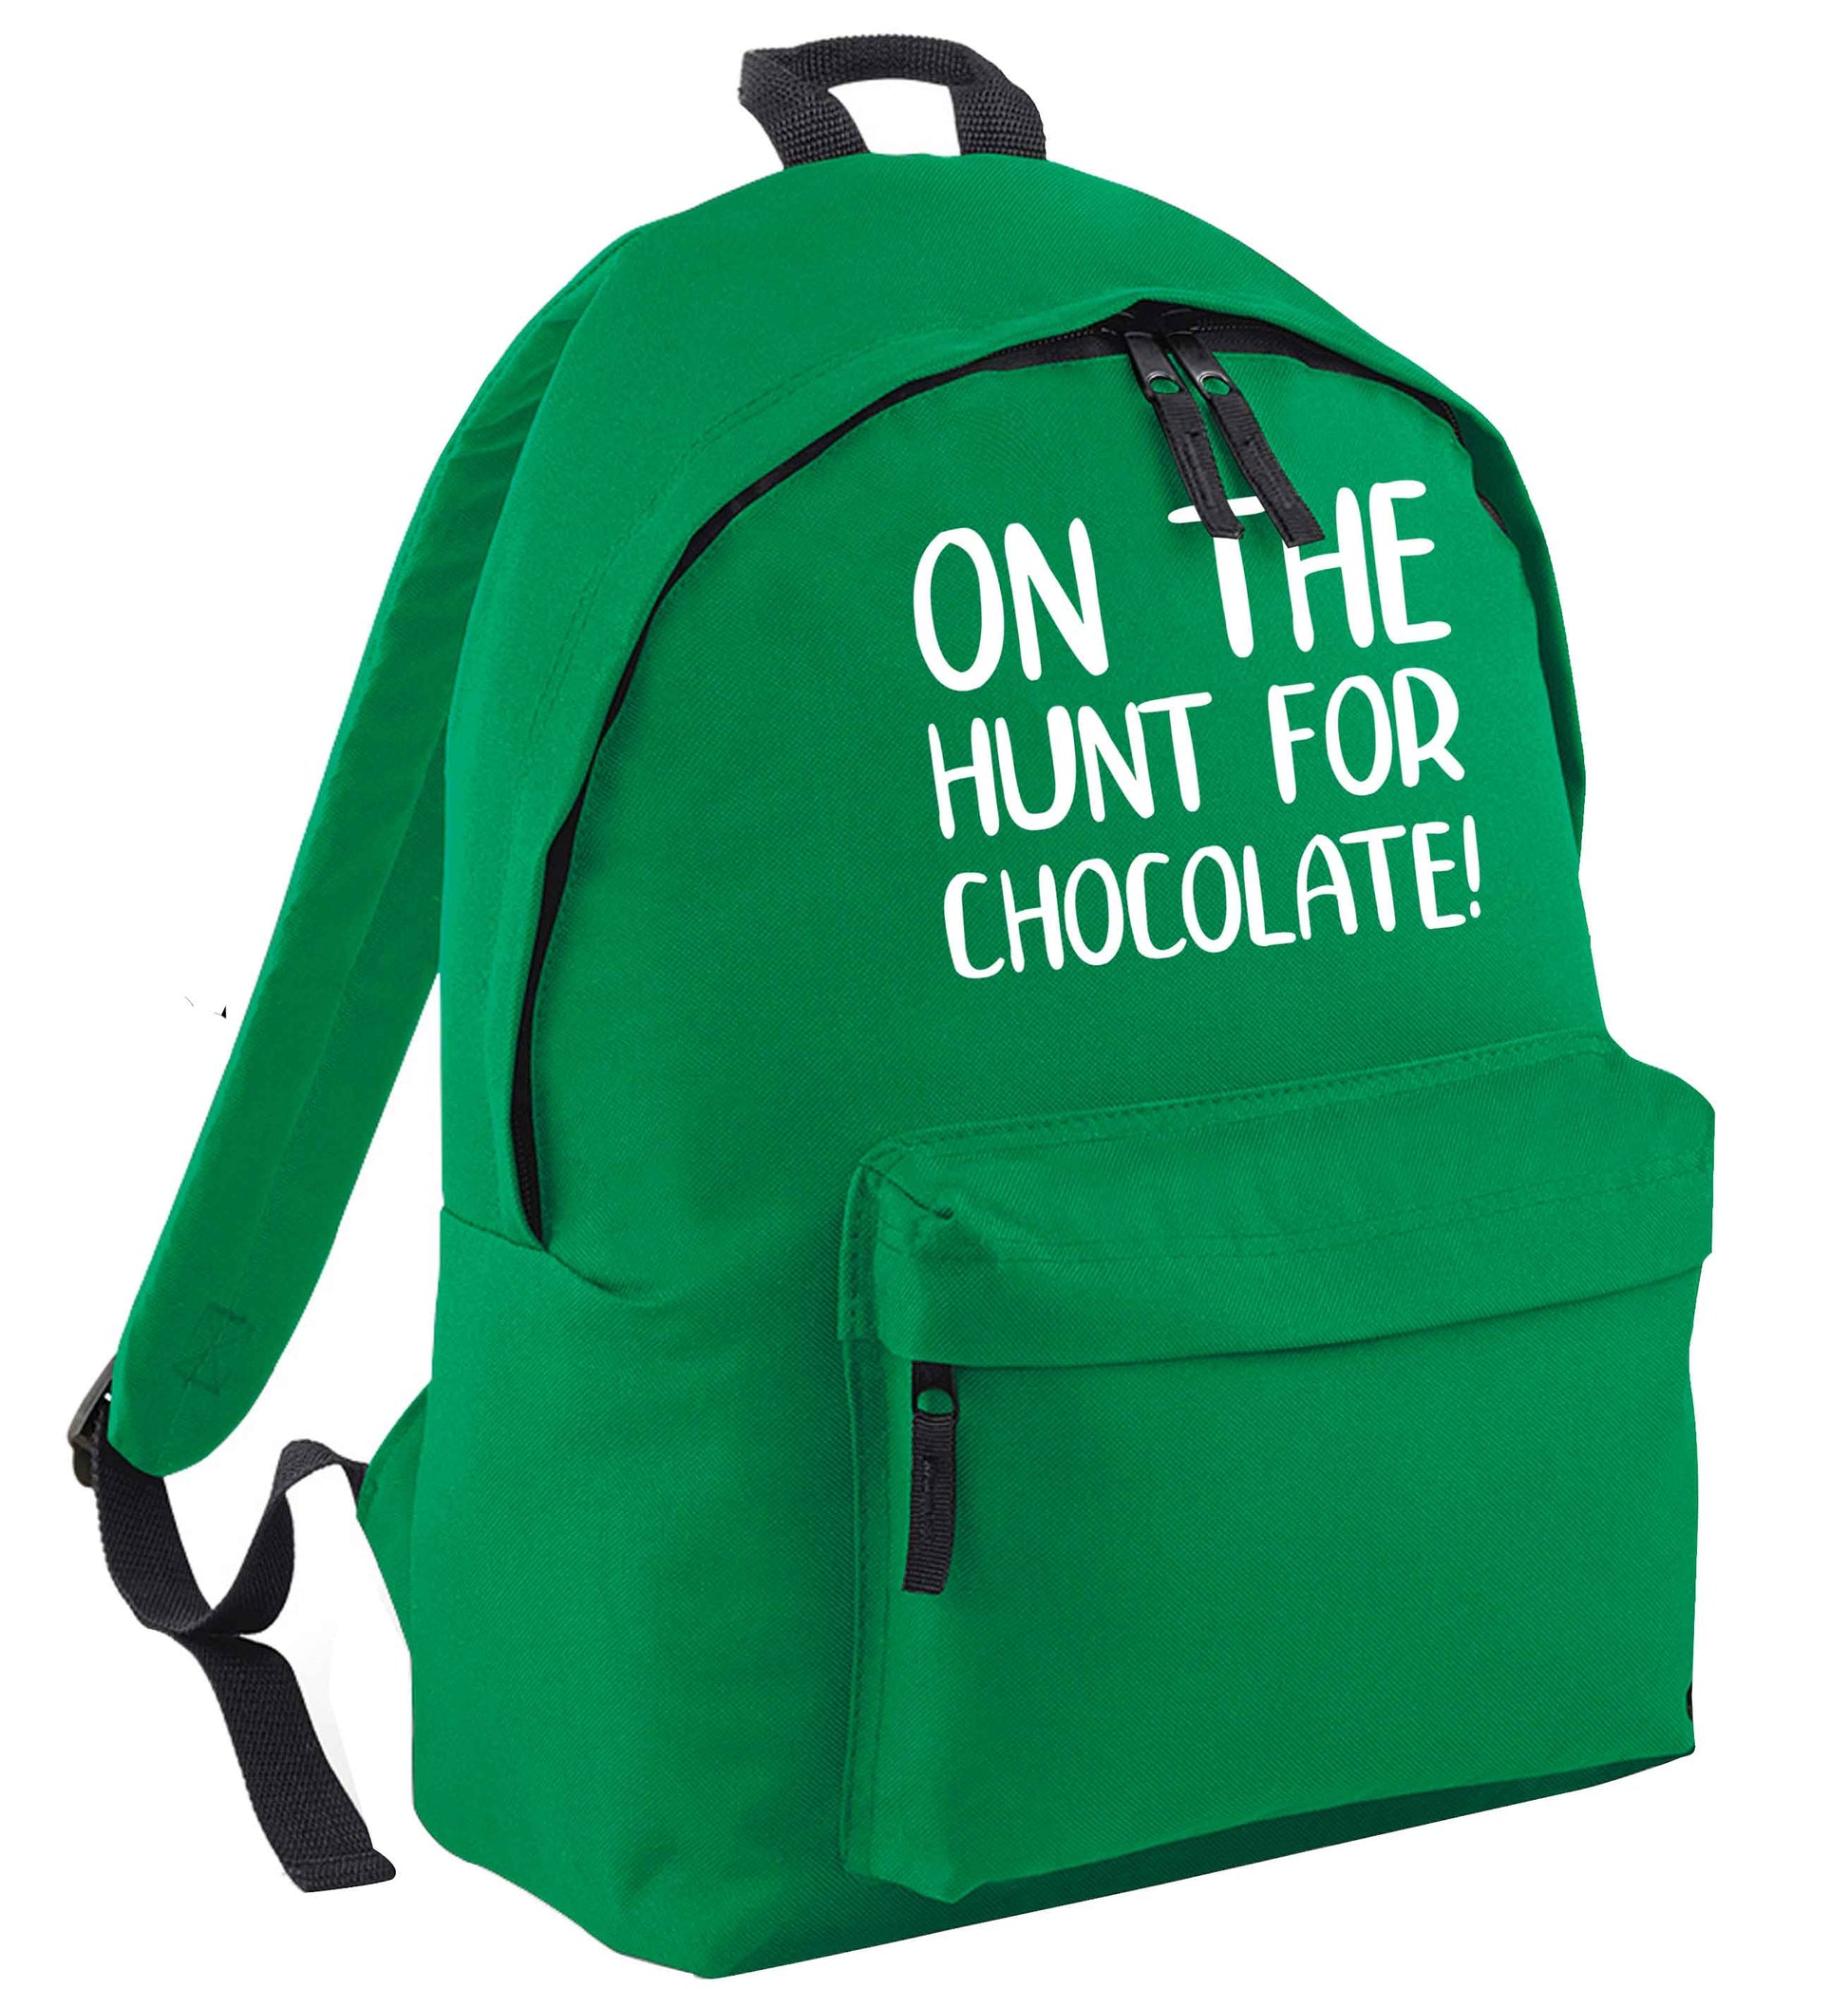 On the hunt for chocolate! green adults backpack